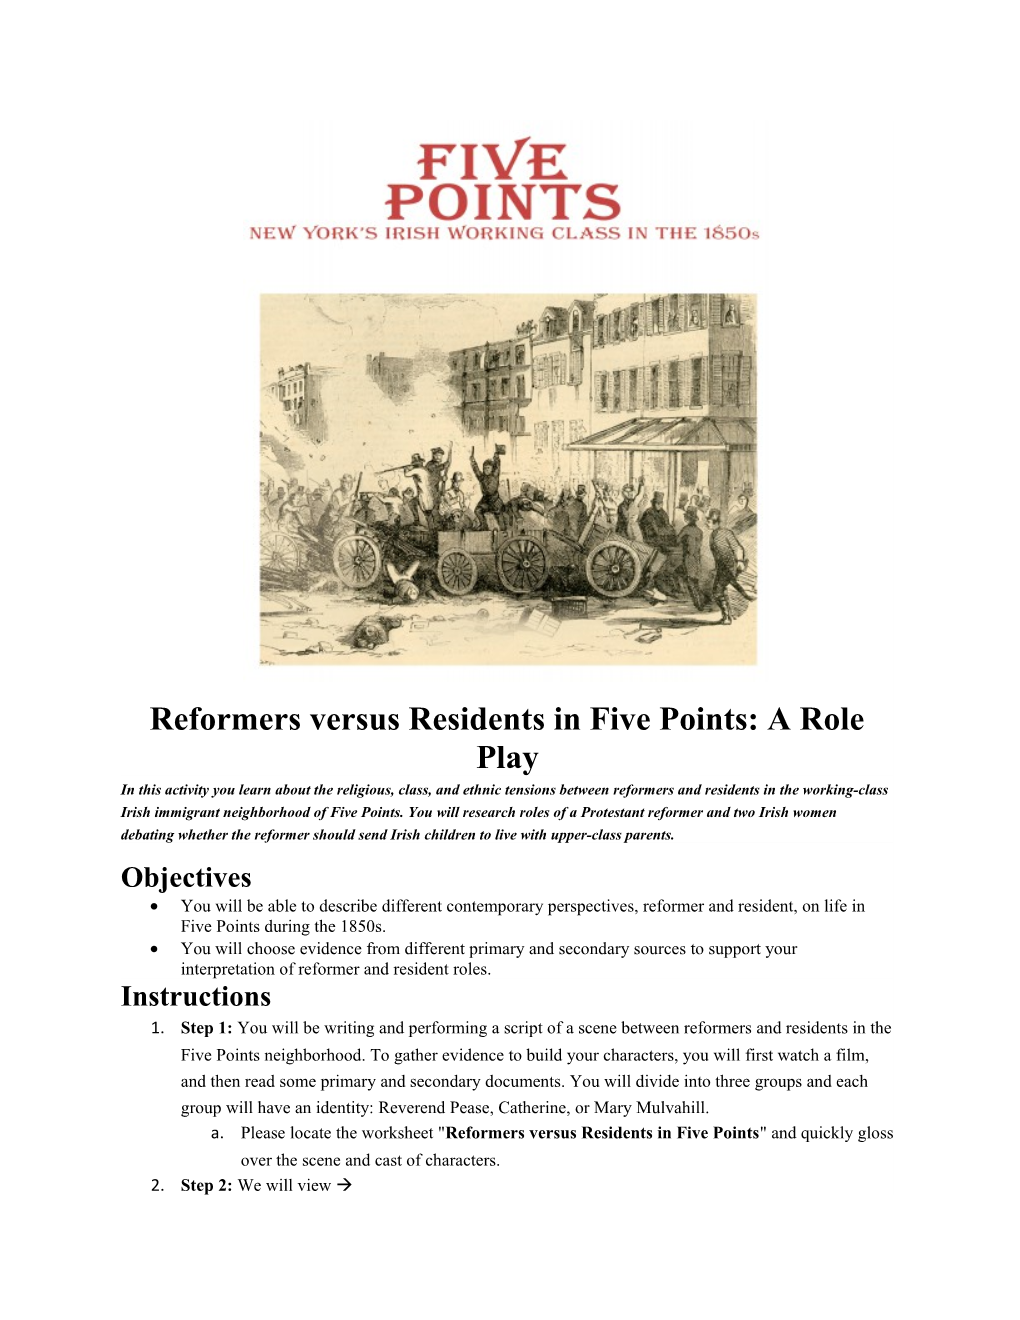 Reformers Versus Residents in Five Points: a Role Play